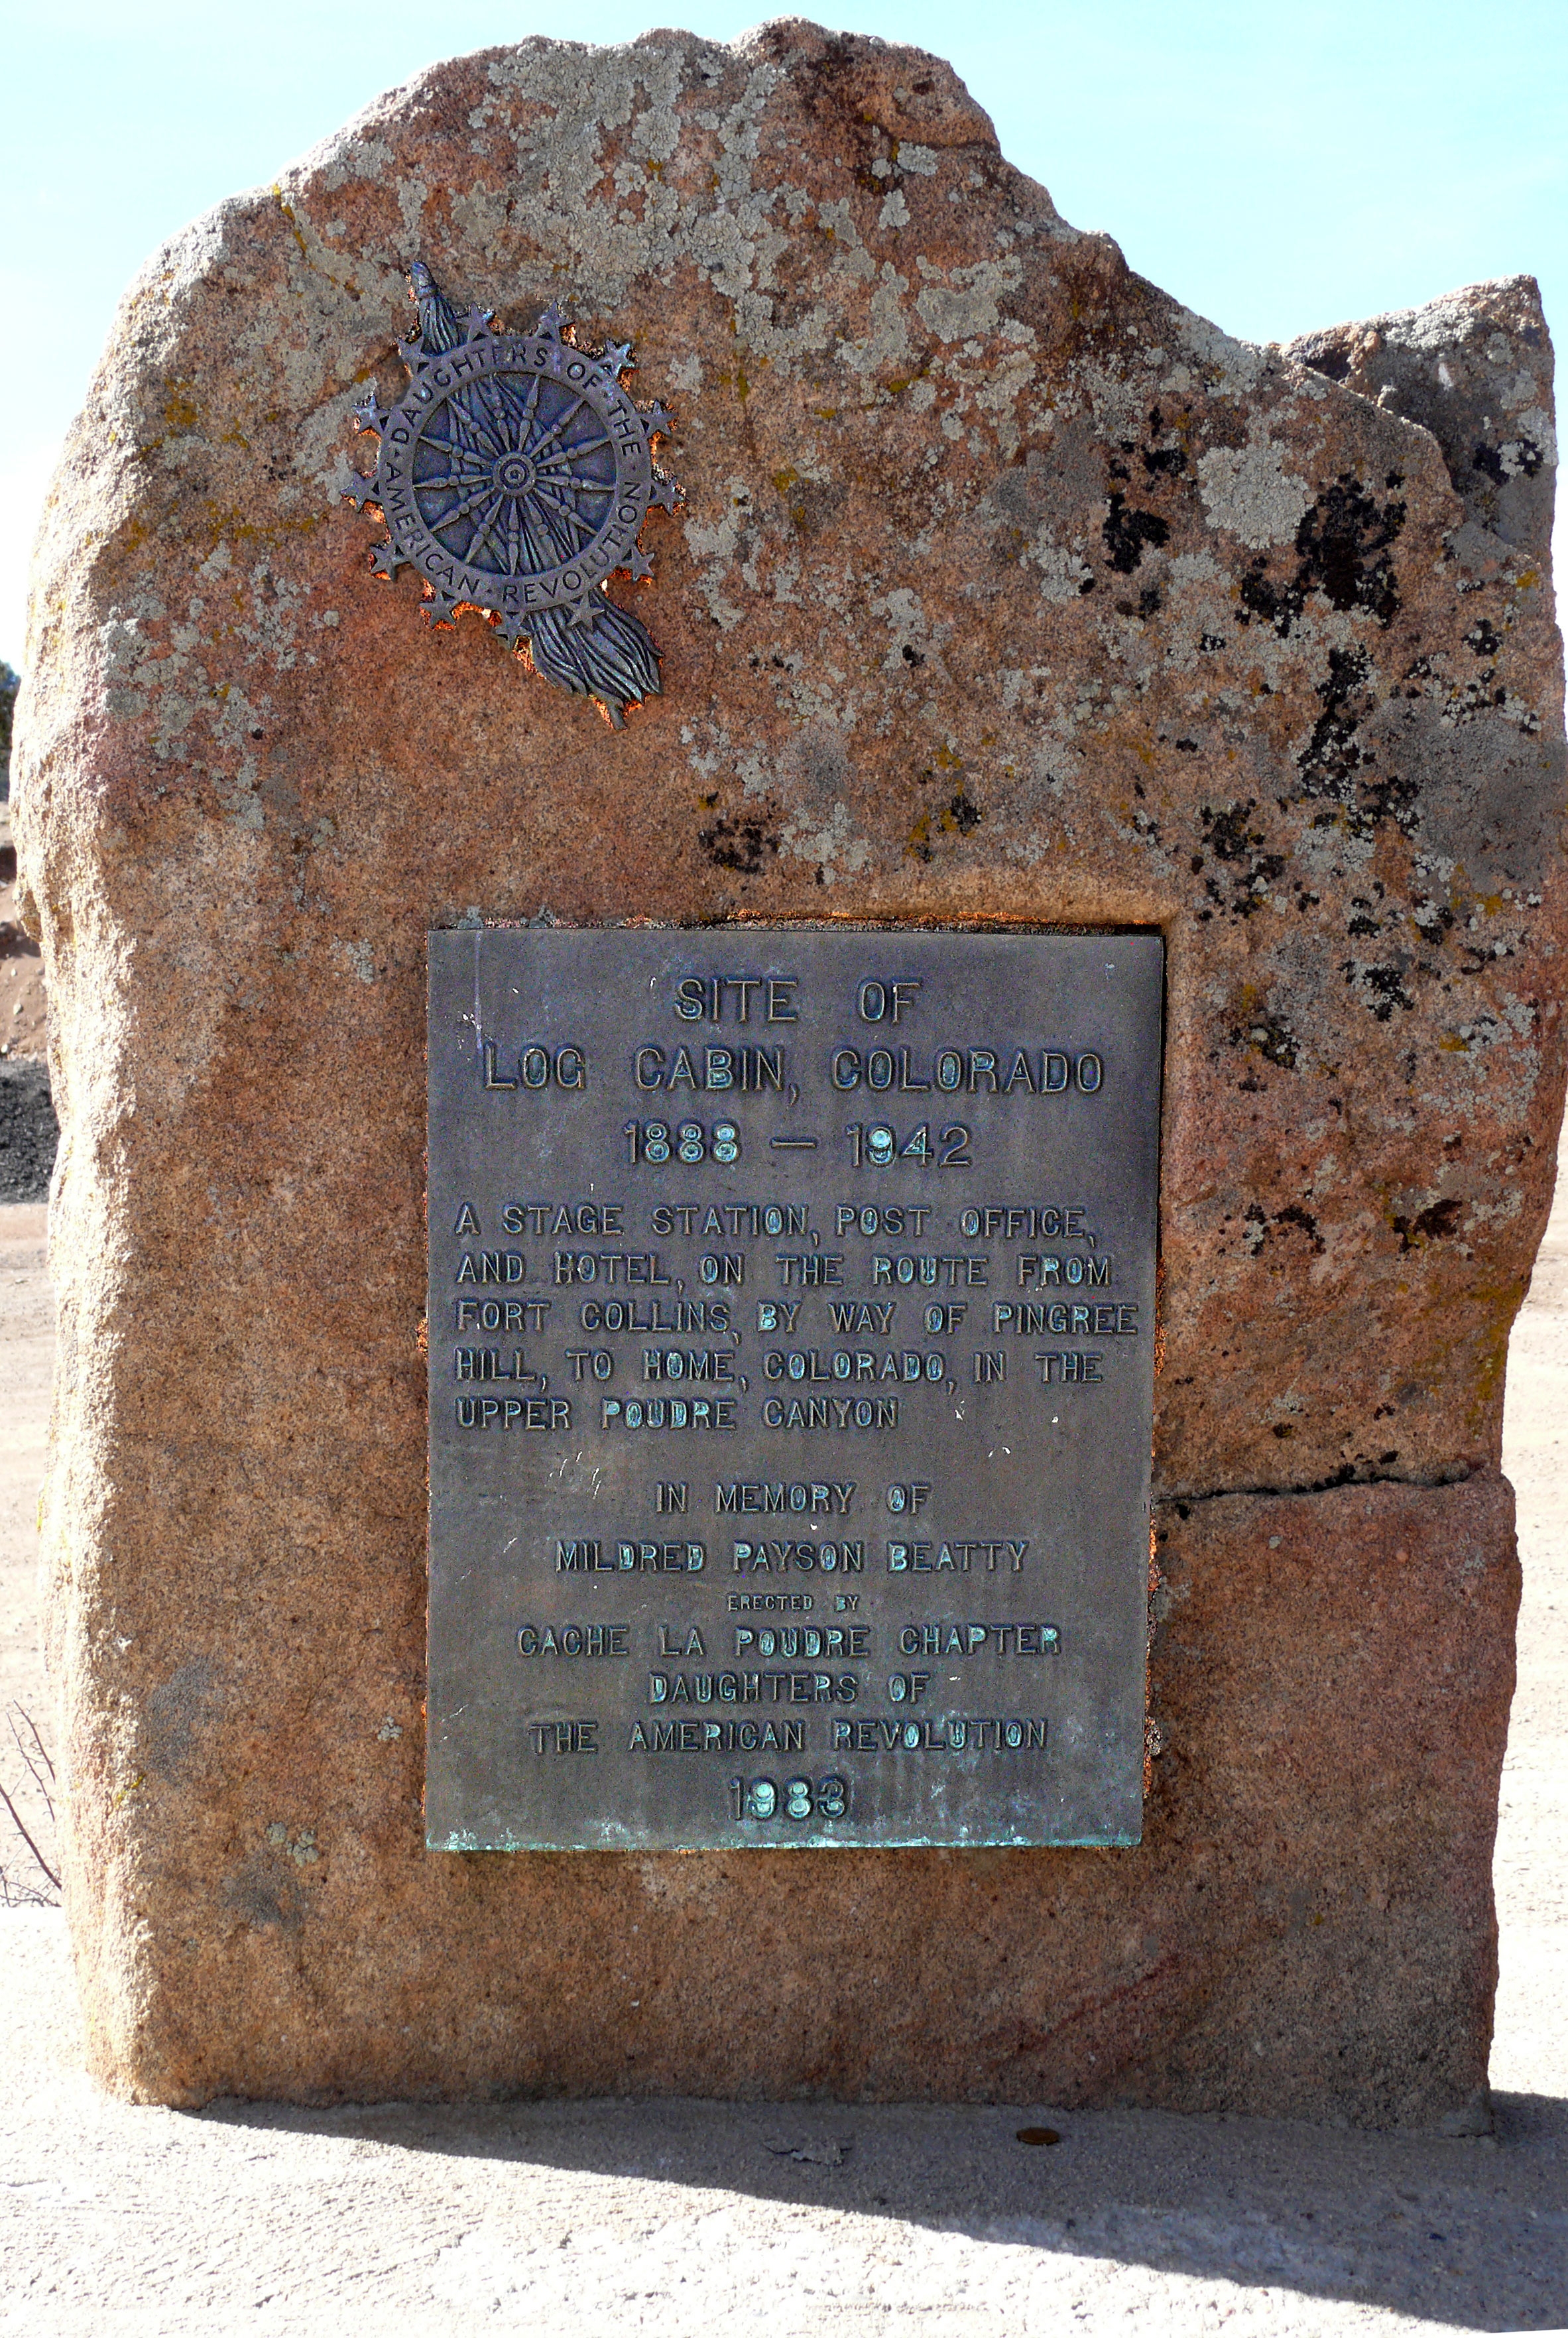 Log Cabin, Colorado Marker, as mounted on local stone.